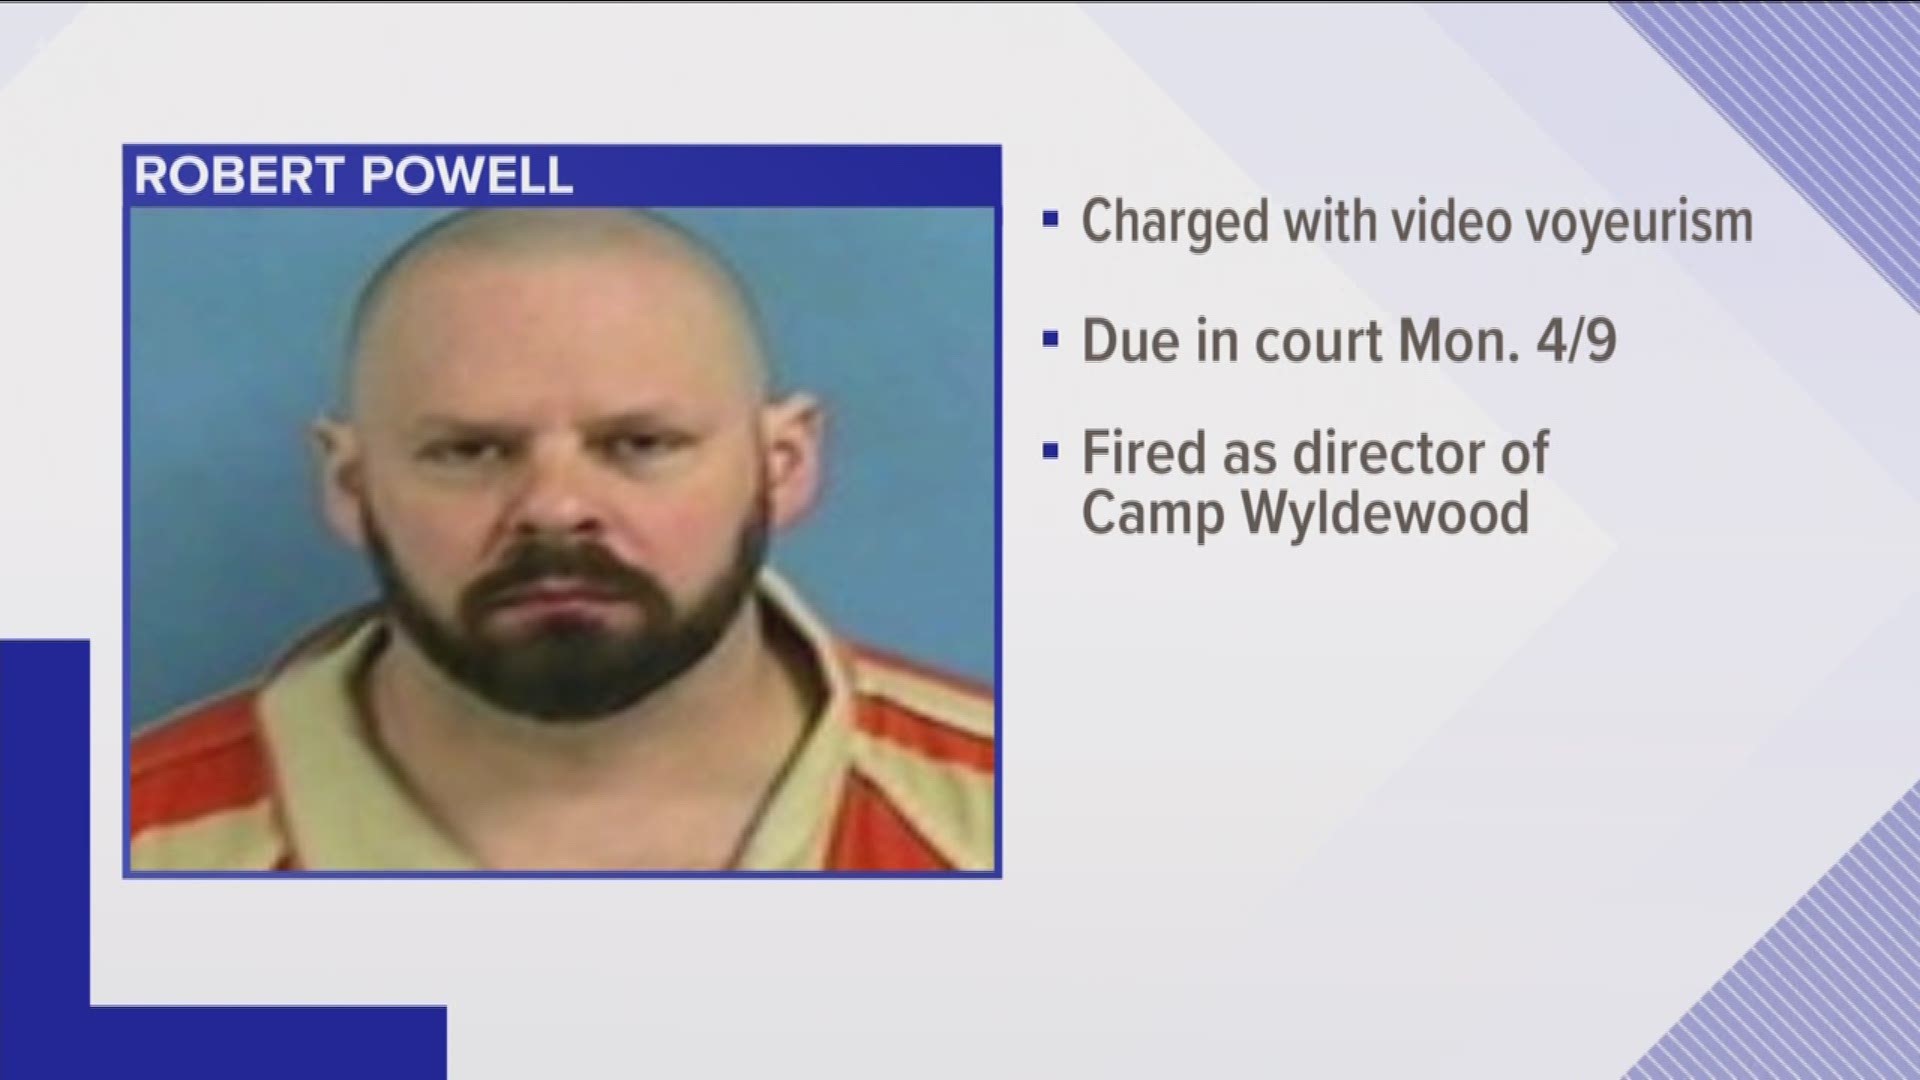 Robert Powell was arrested for video voyeurism and is due in court on Monday, April 9.